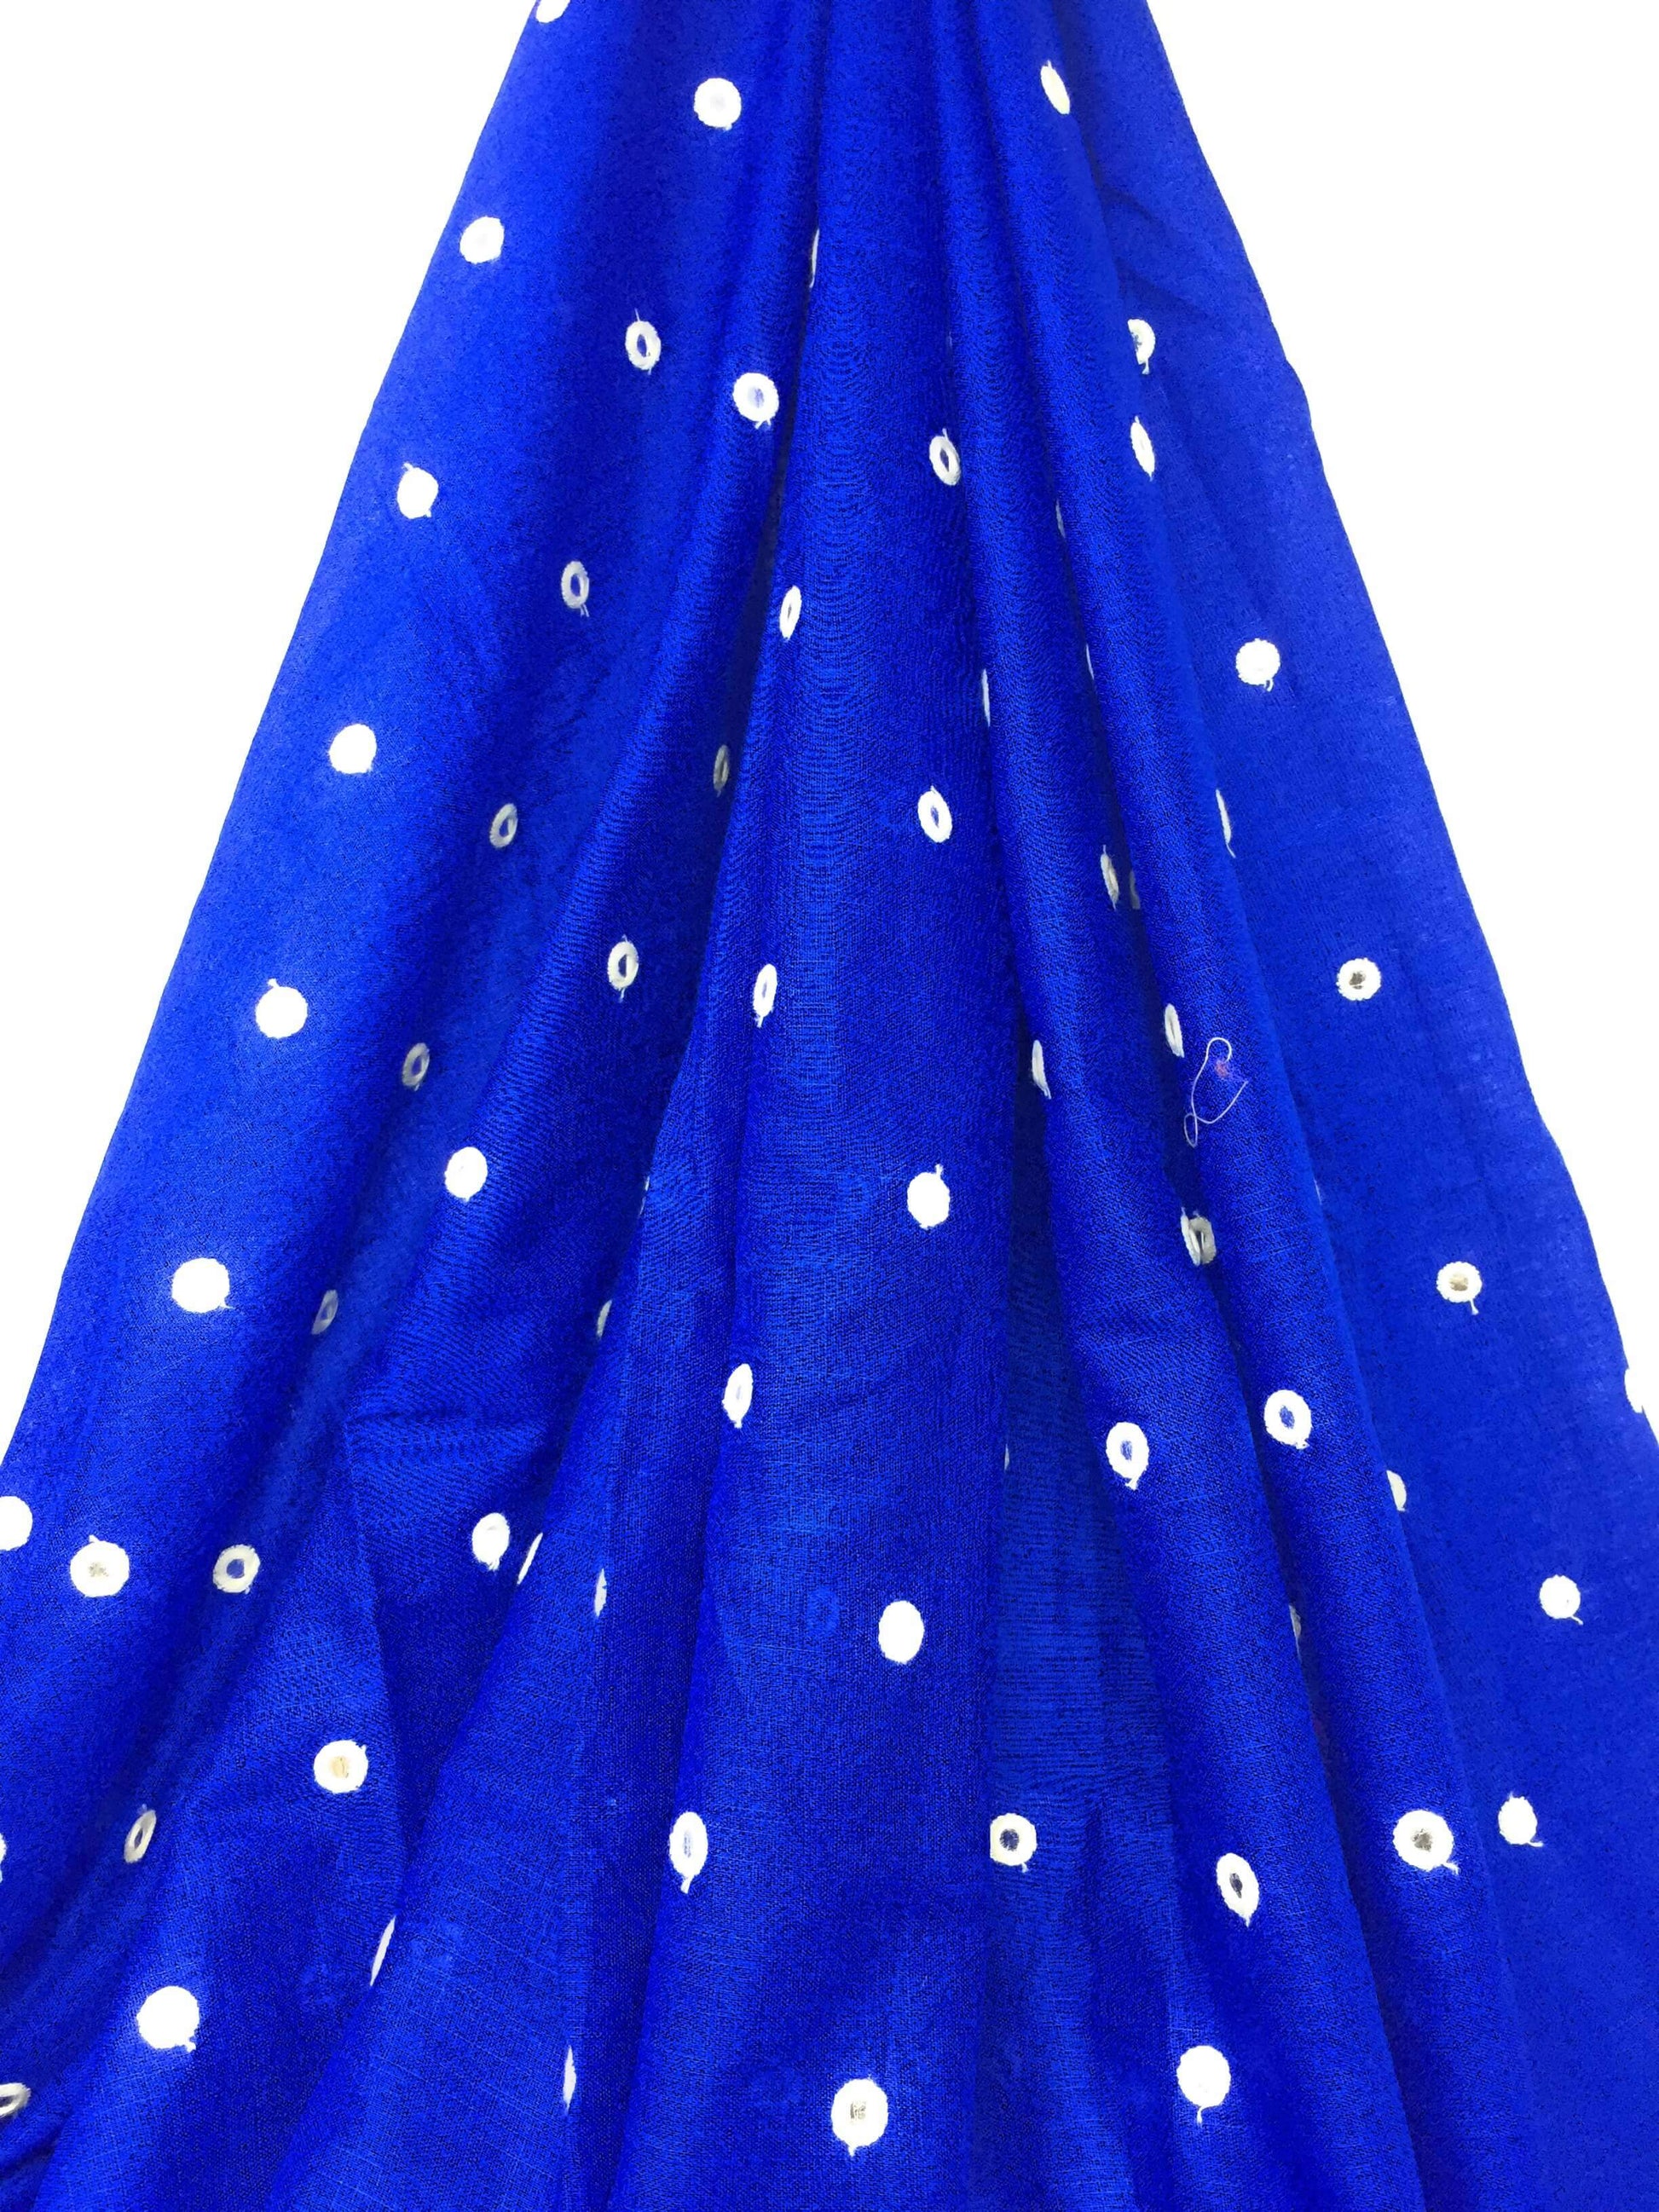 Mirror Work Cloth In Cotton Material In Blue